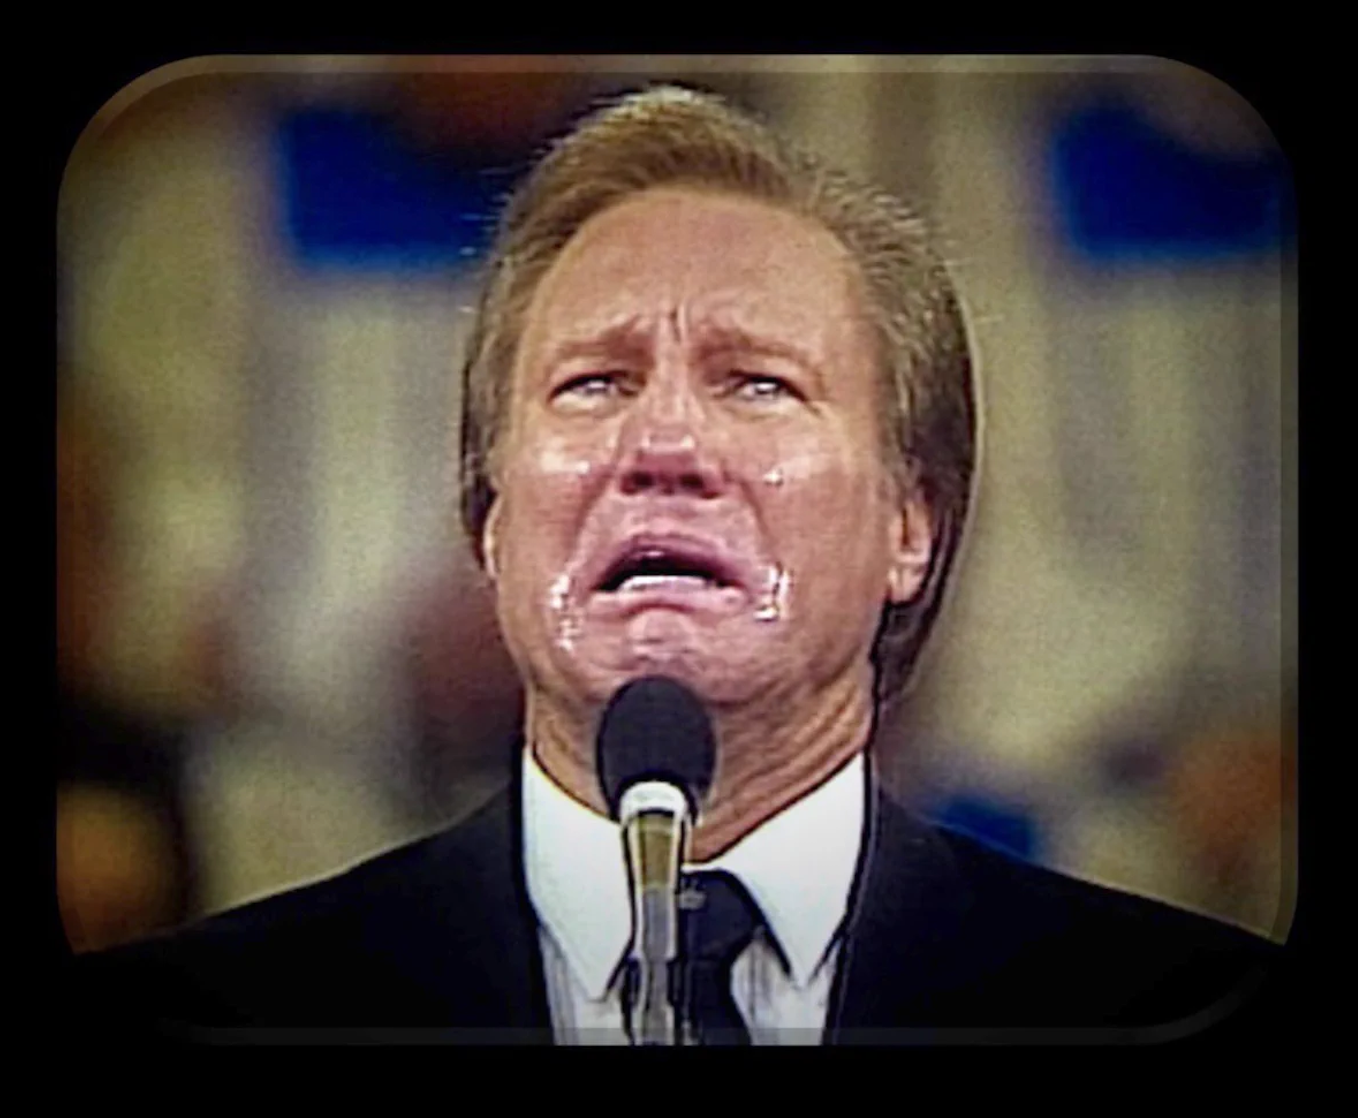 EducaSectas. Jimmy Swaggart